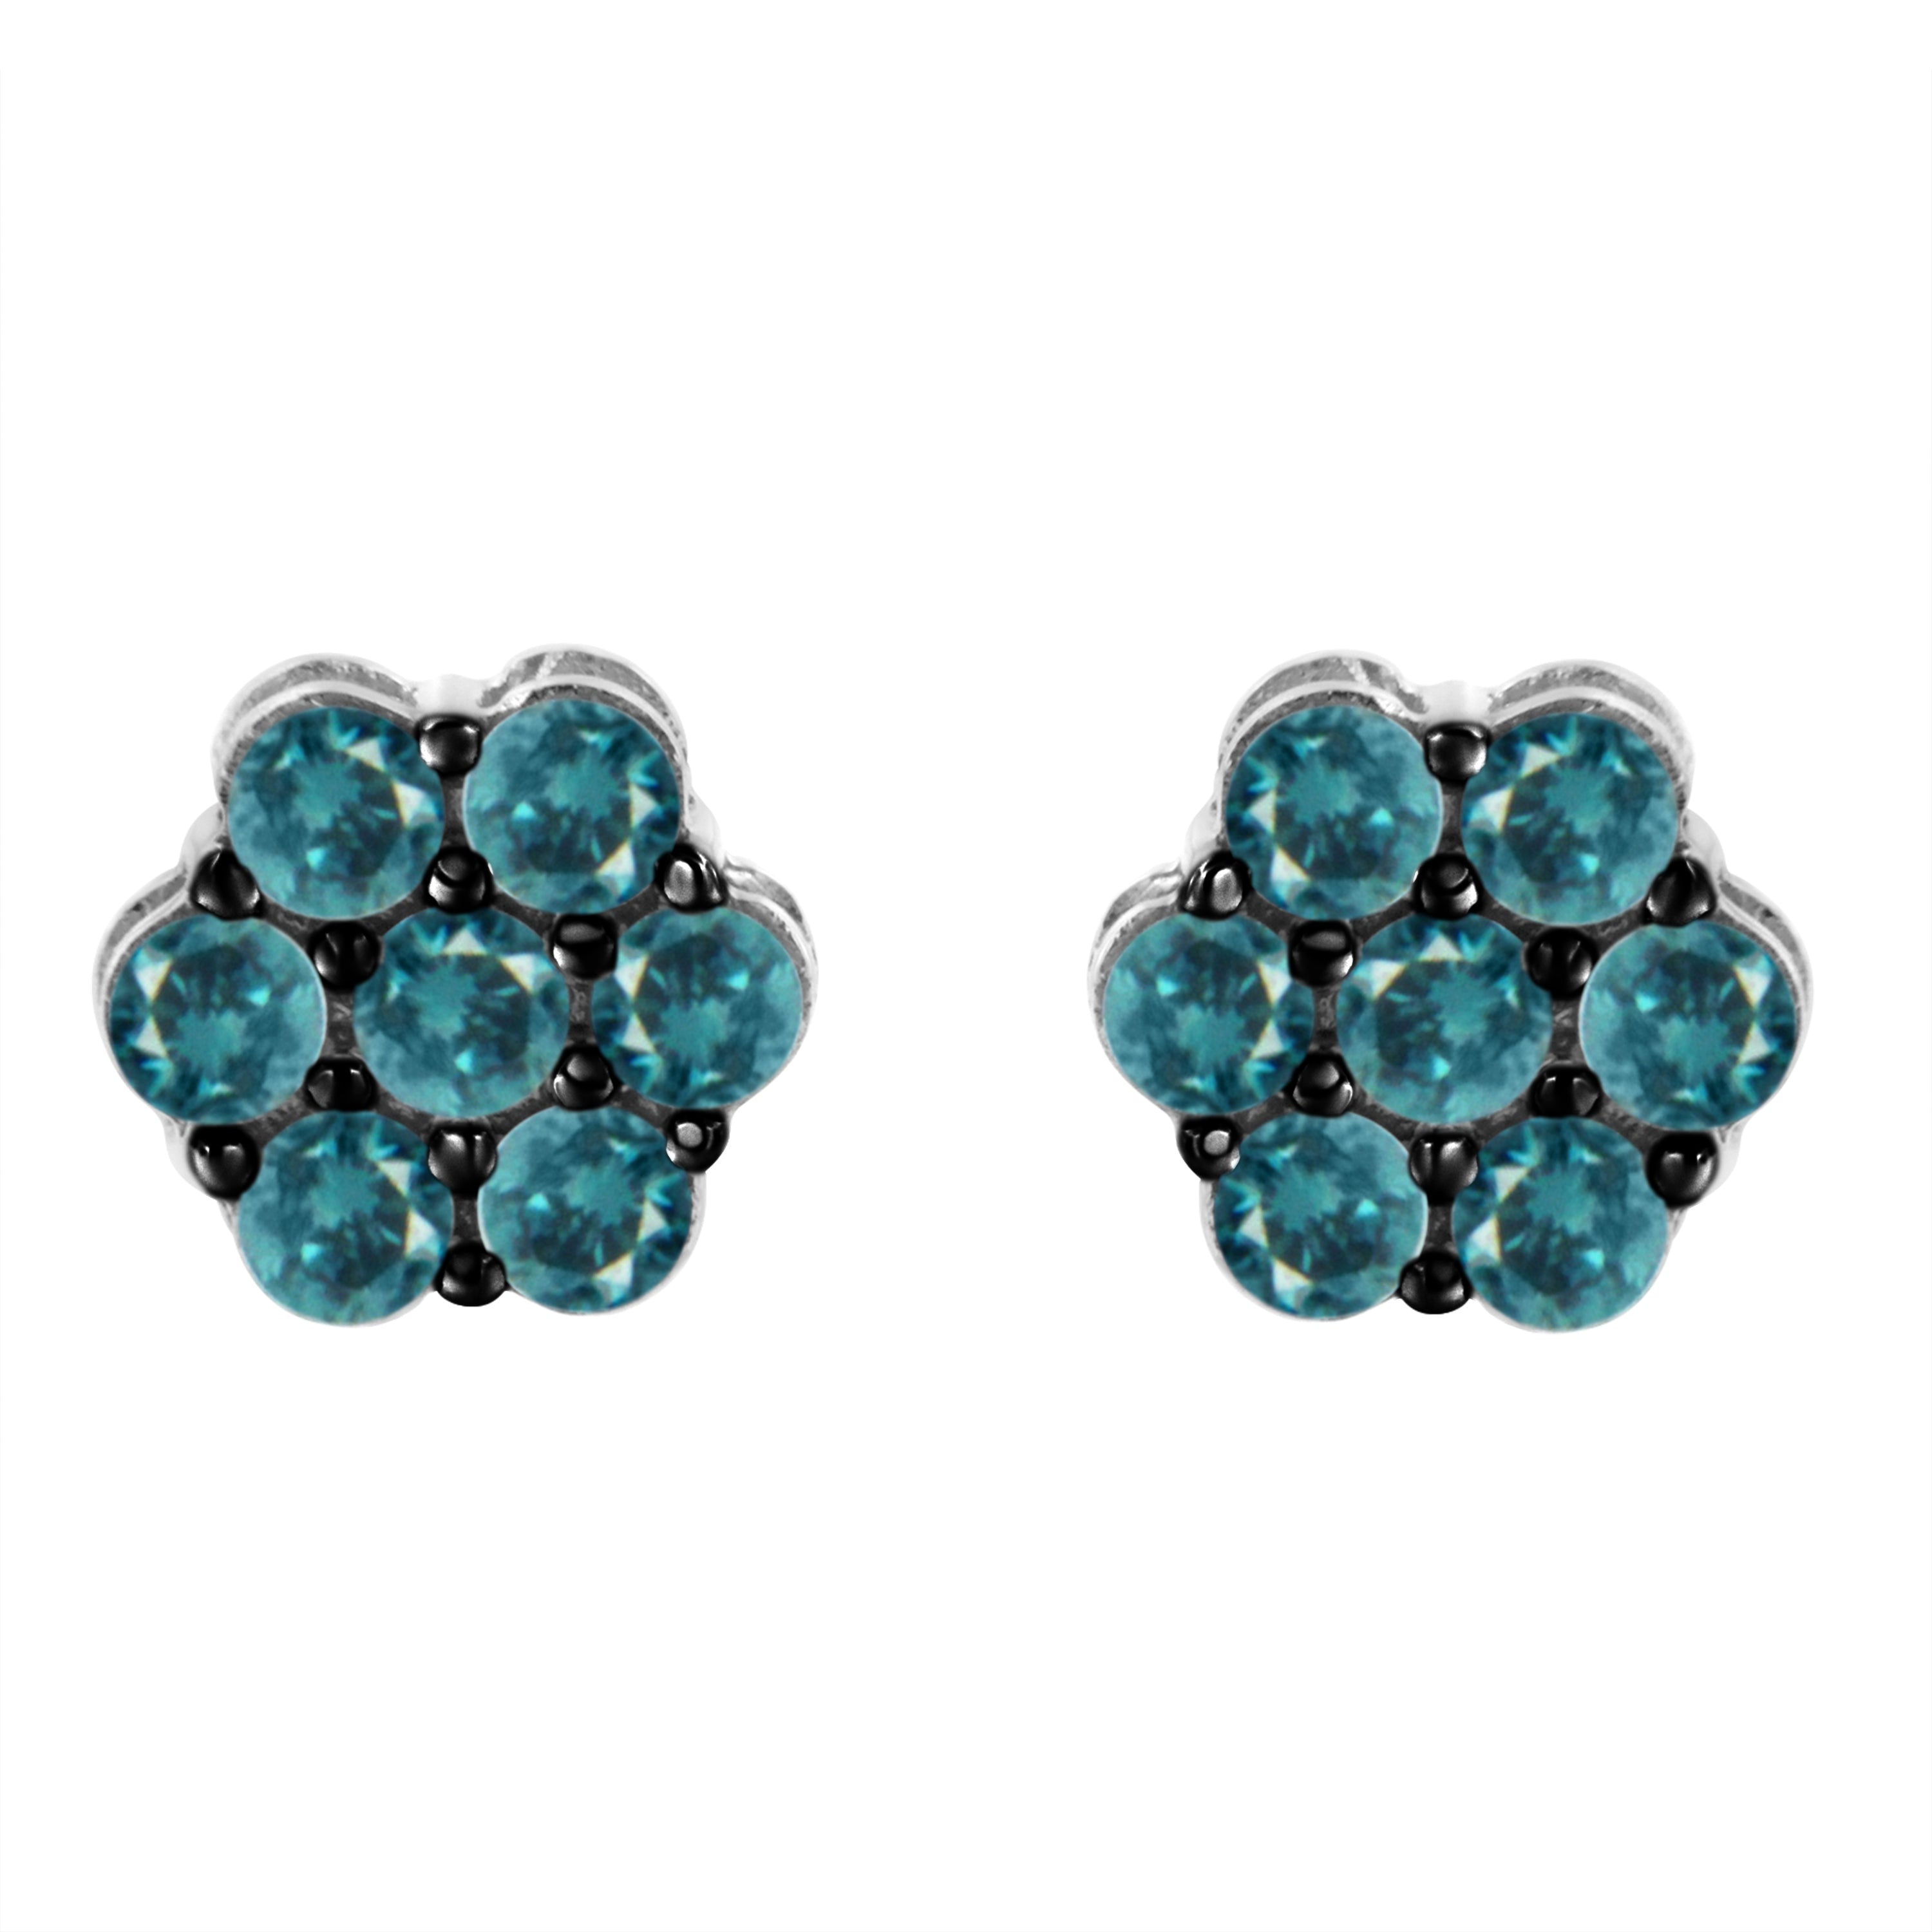 Sterling-Silver-Treated-Blue-Diamond-Floral-Stud-Earrings-(1-Cttw,-Blue-Color,-I2-I3-Clarity)-Earrings